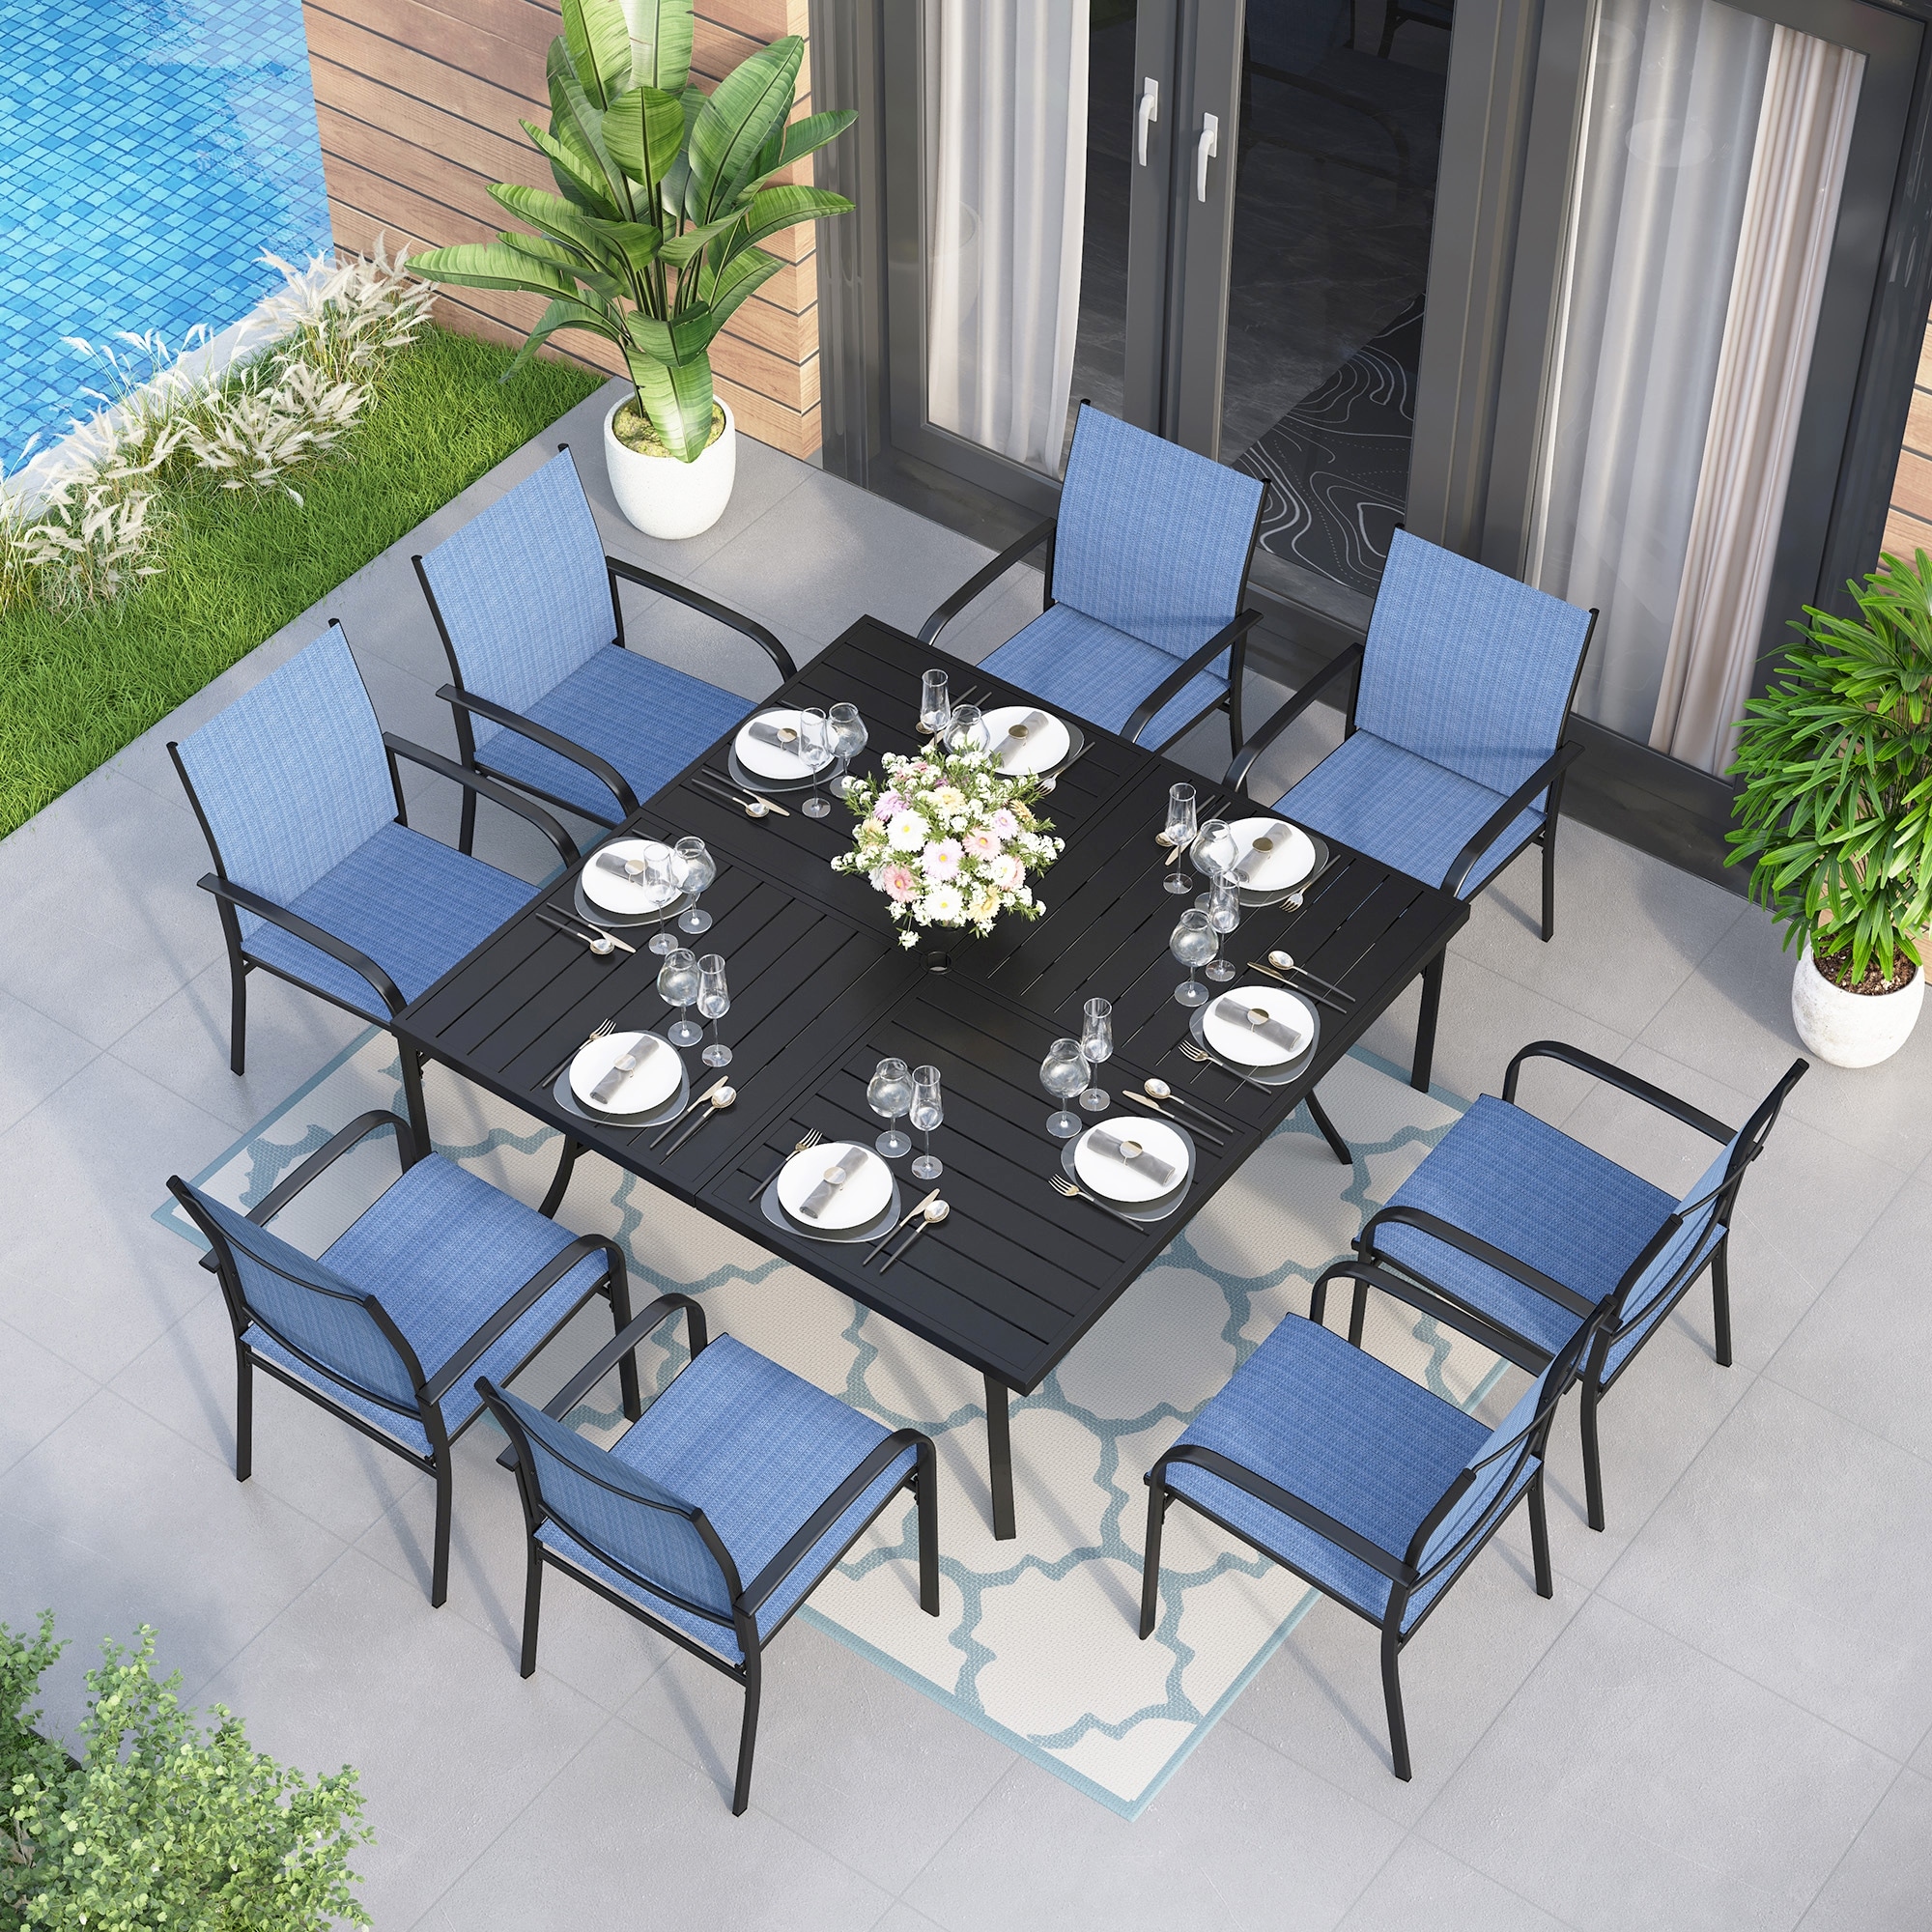 https://ak1.ostkcdn.com/images/products/is/images/direct/375ce66d3397de57543b8905cb423ff4bf454f13/9-Piece-Patio-Dining-Set%2C-60-Inch-Square-Metal-Table-and-8-Textilene-Dining-Chairs.jpg